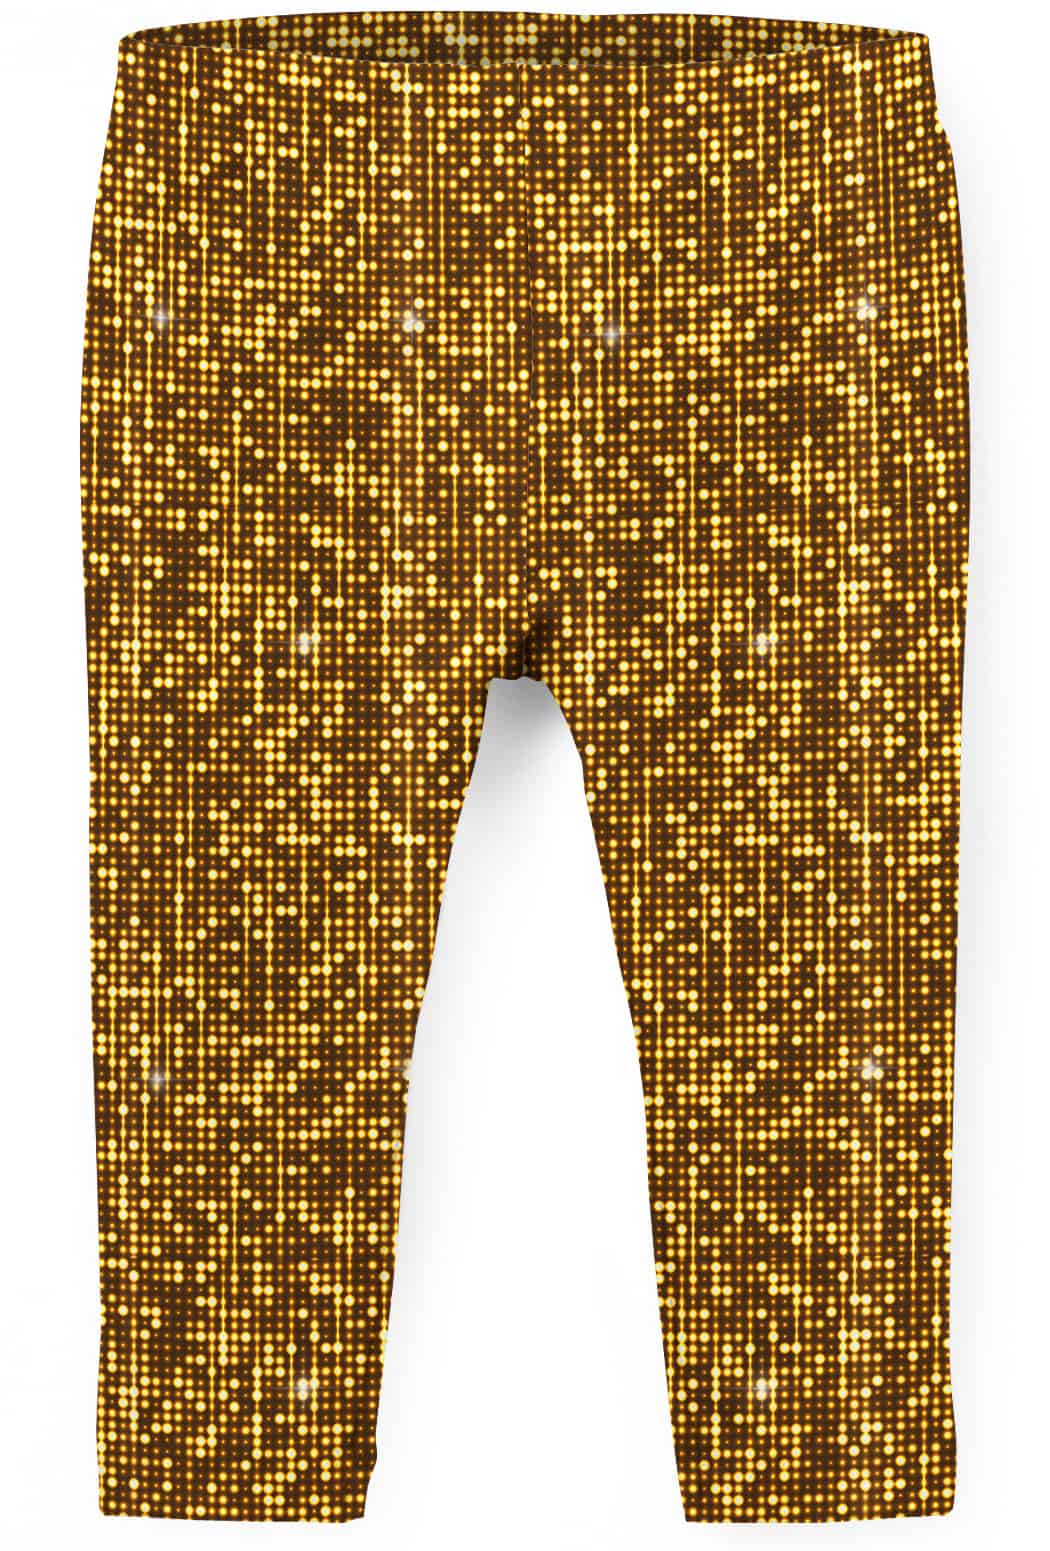 Cotton Brown Kids Legging, Size: Medium at Rs 85/piece in Ahmedabad | ID:  17168391373